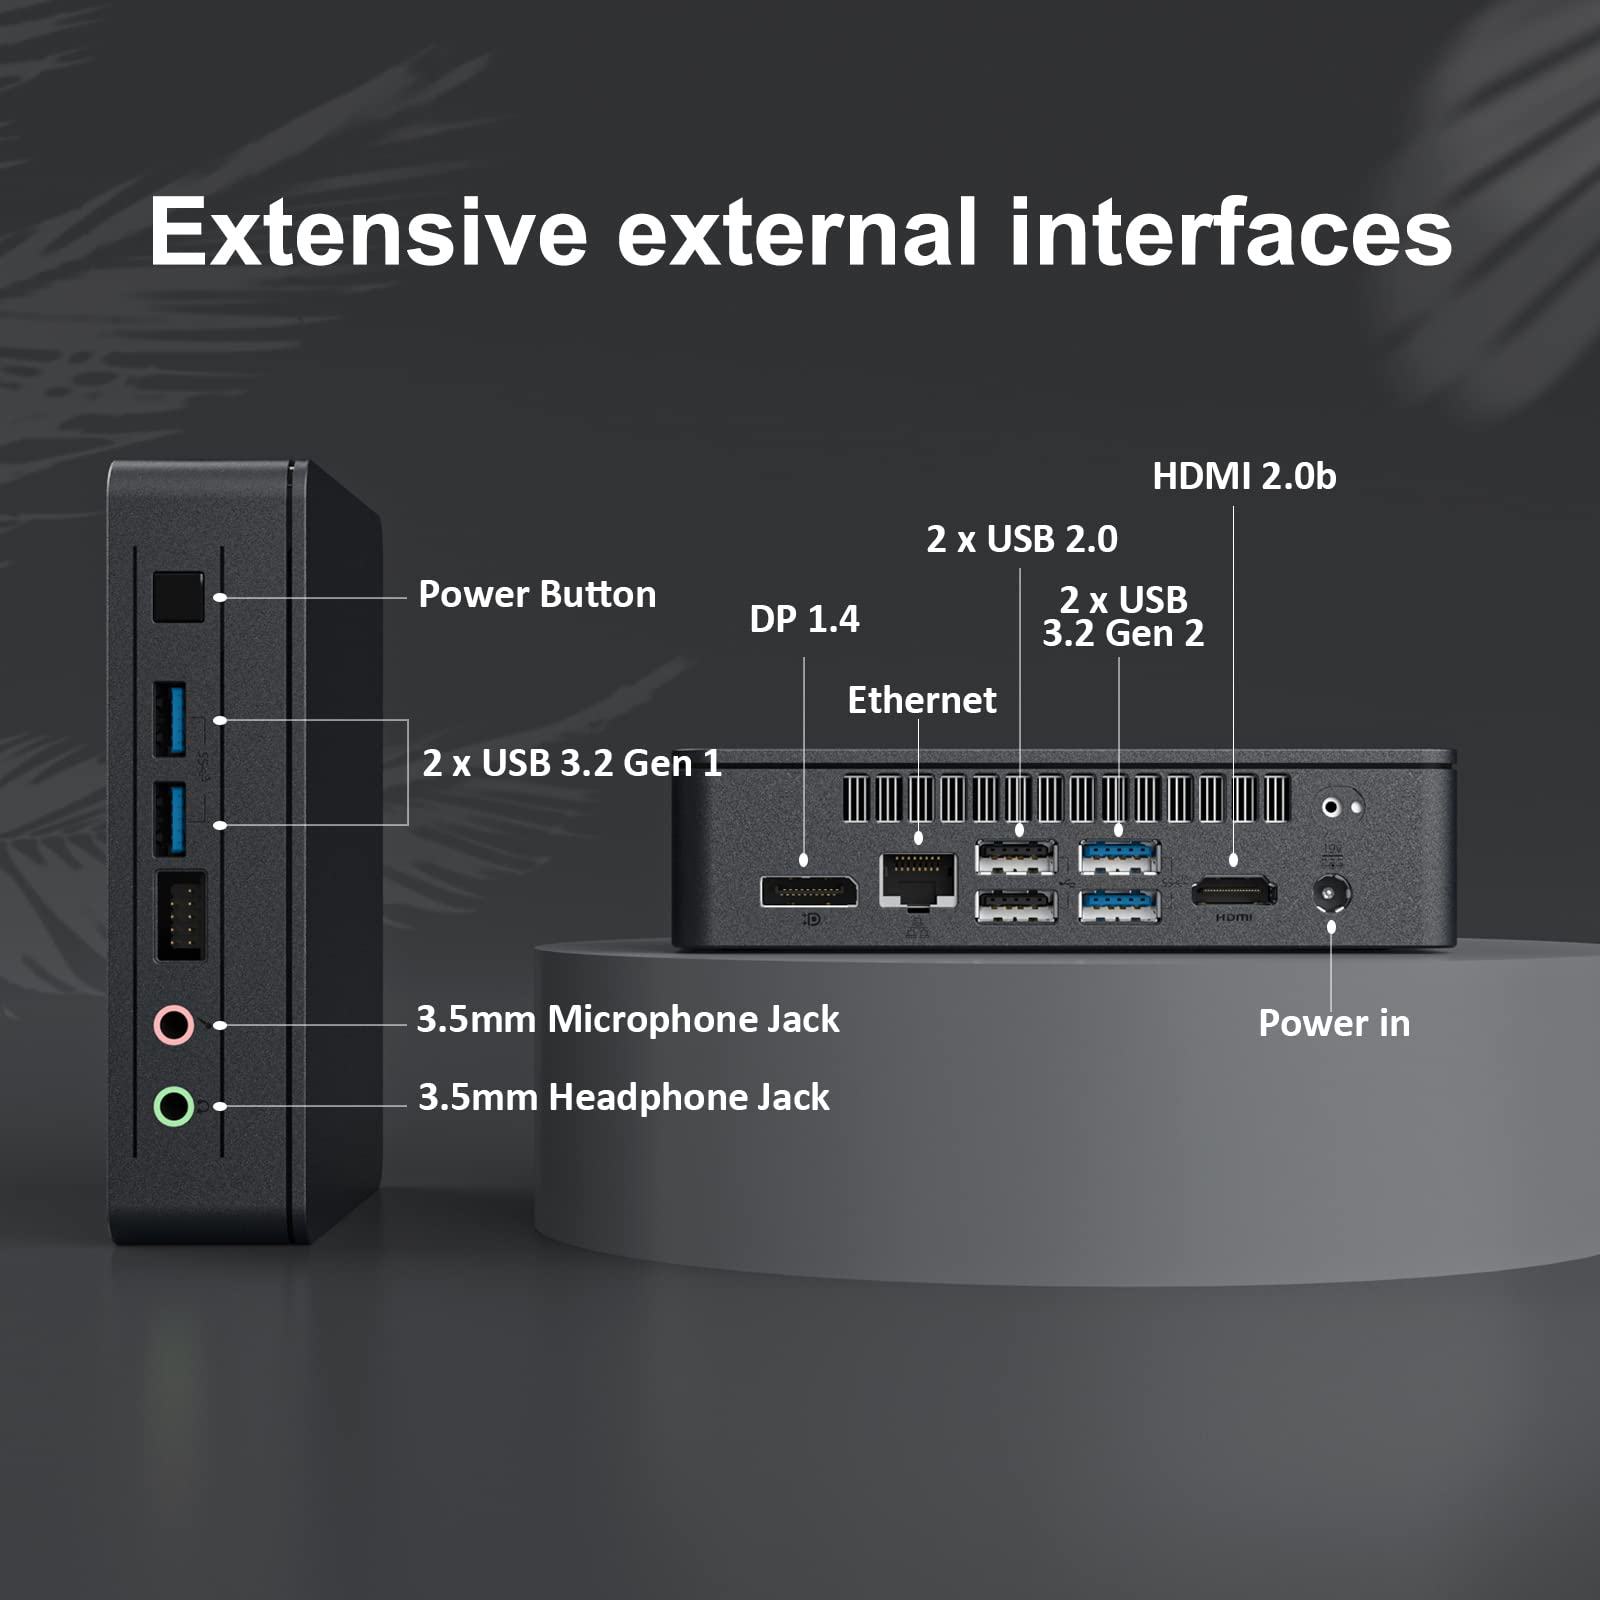 Intel NUC 11 Essential equipped with extensive external interfaces.